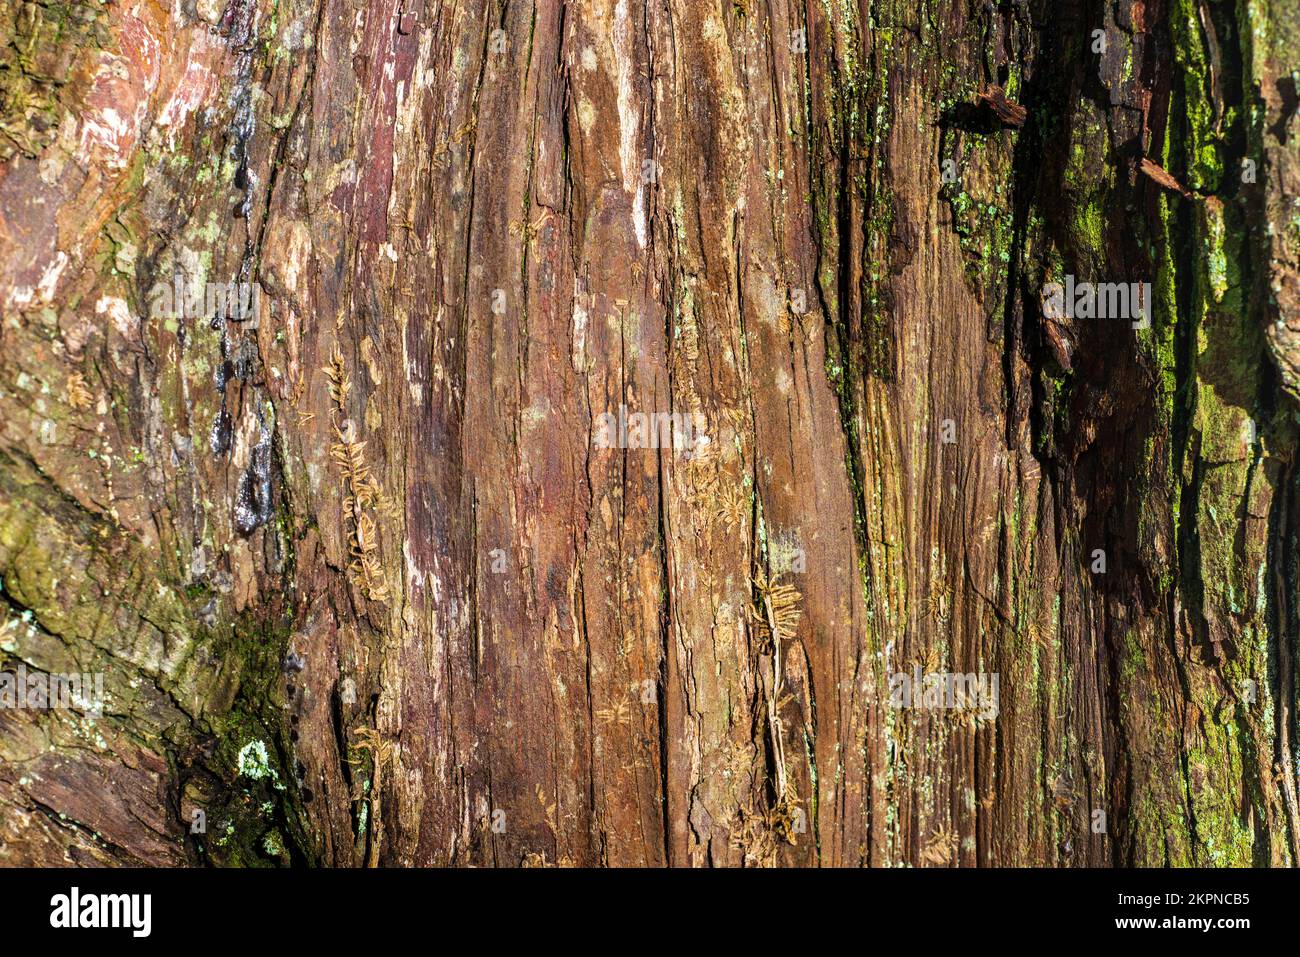 Bark of a tree with texture and details Stock Photo